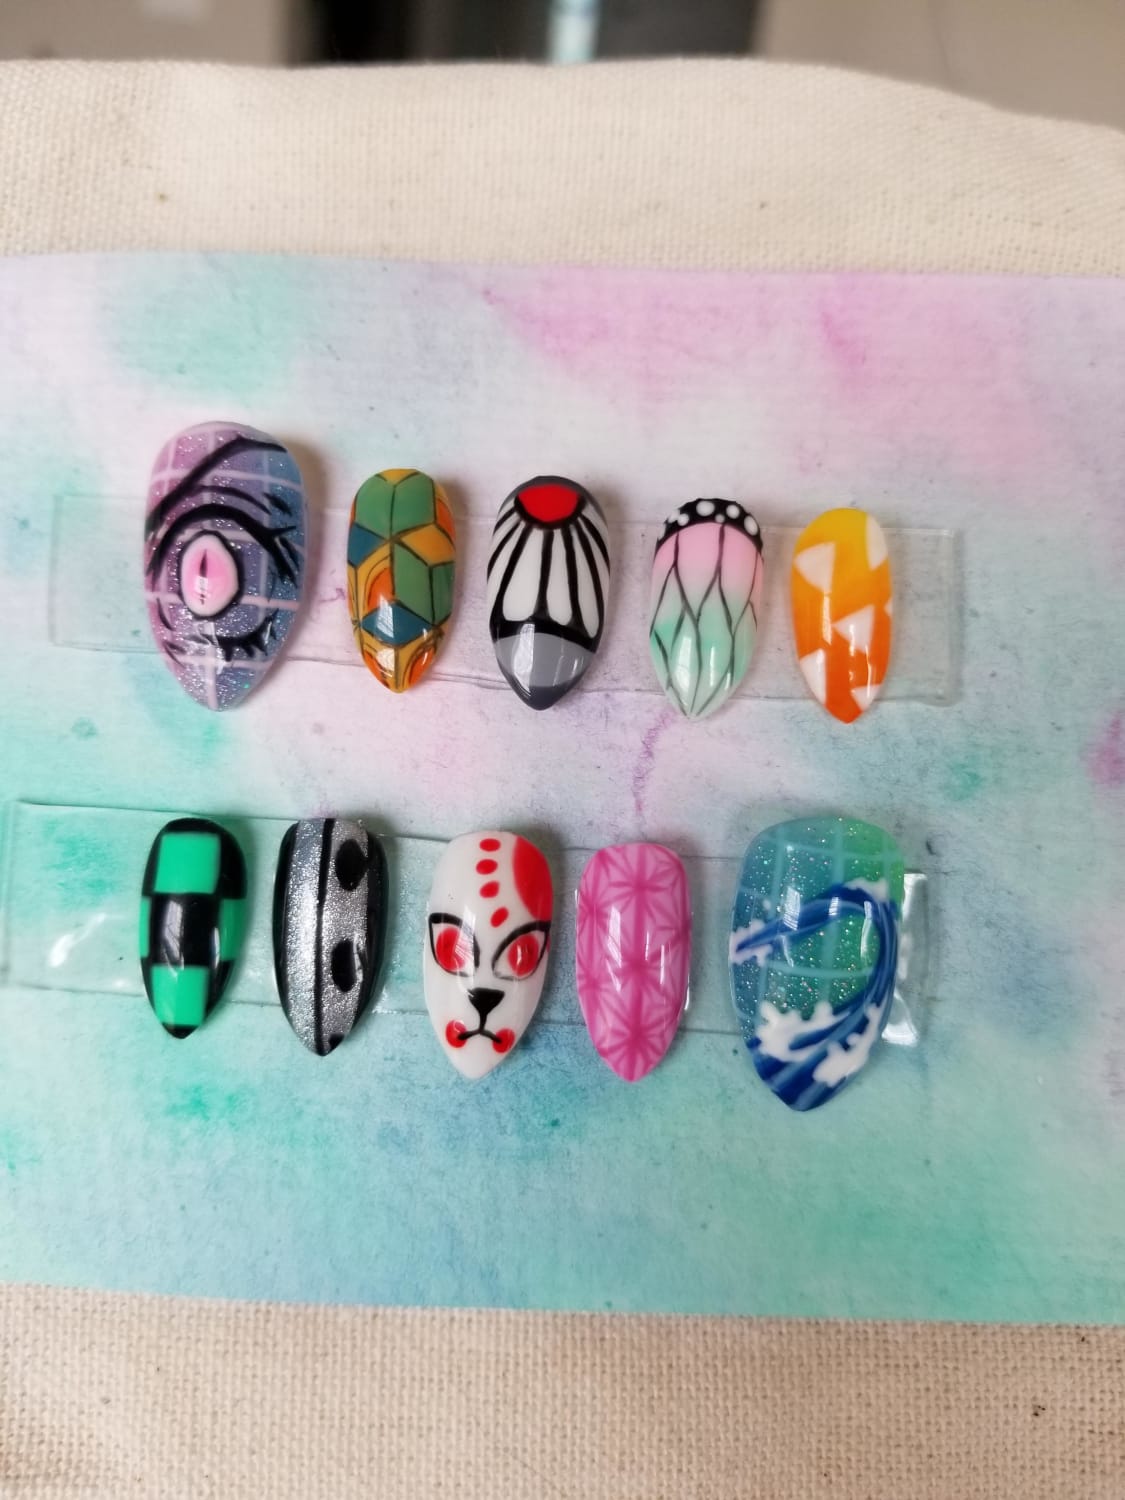 I completed my first set of press ons for my friend! She wanted Demon Slayer nails. These took me an unreasonable amount of time 😂